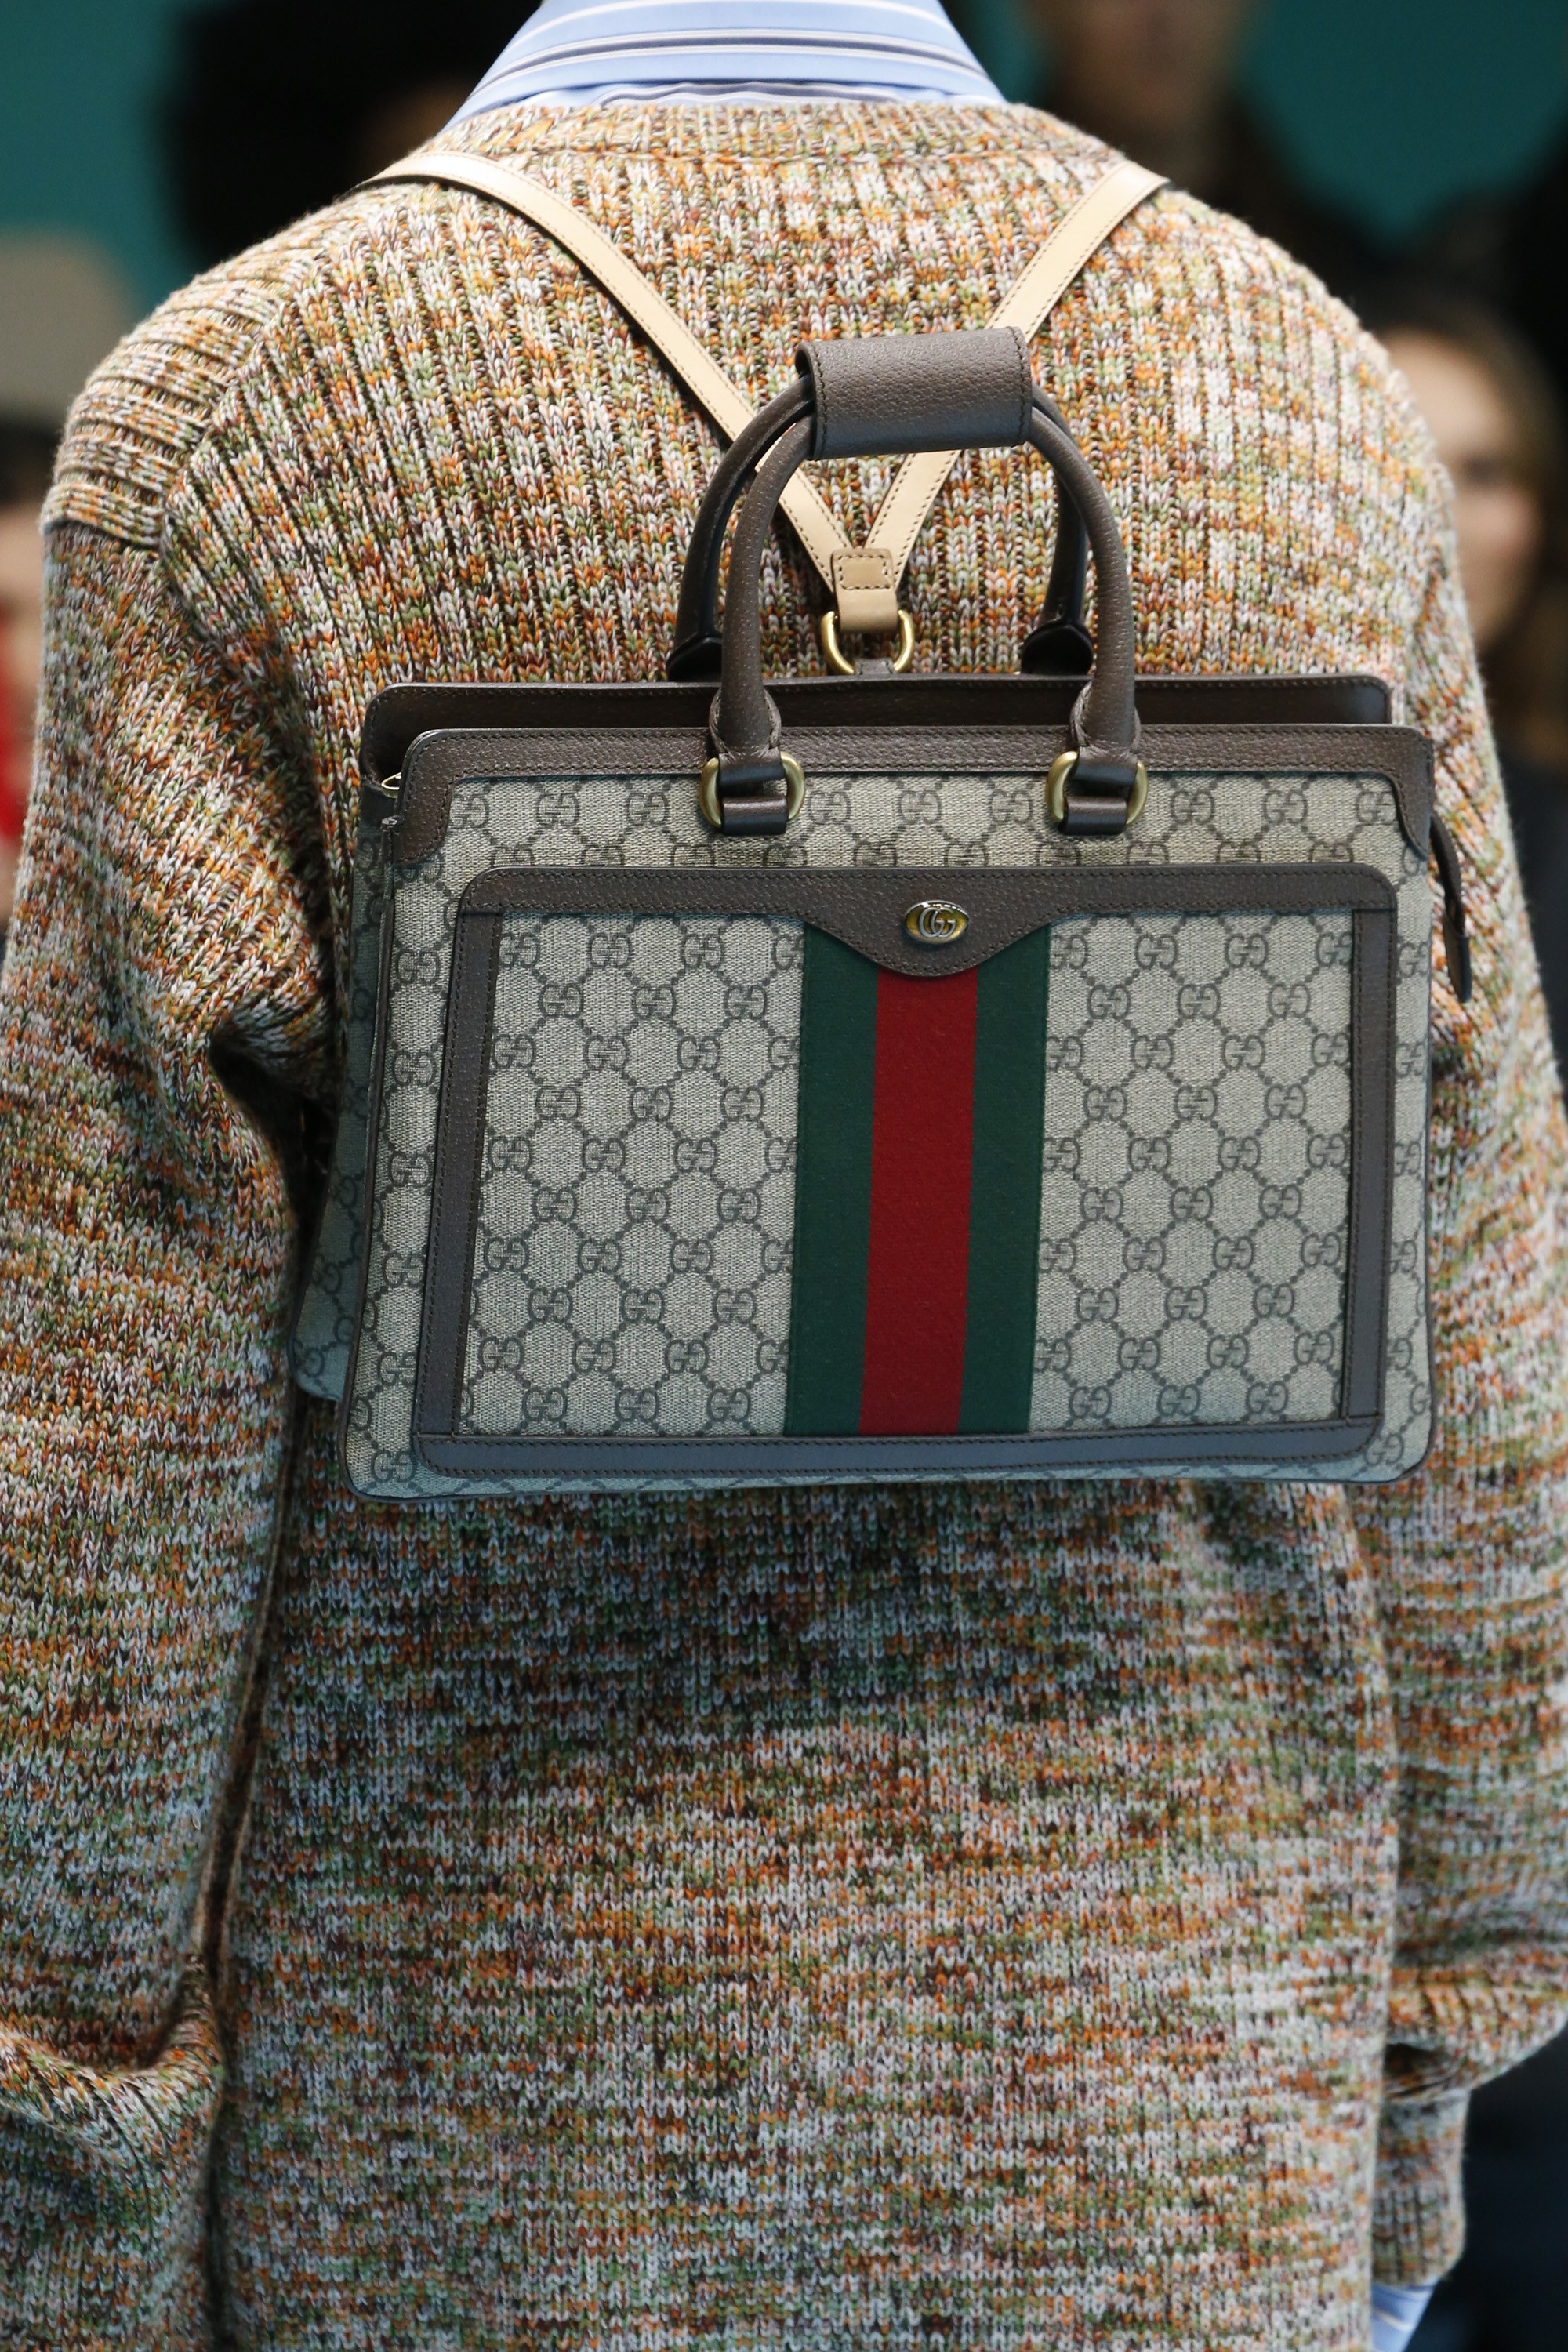 Gucci Fall/Winter 2018 Runway Bag Collection | Spotted Fashion